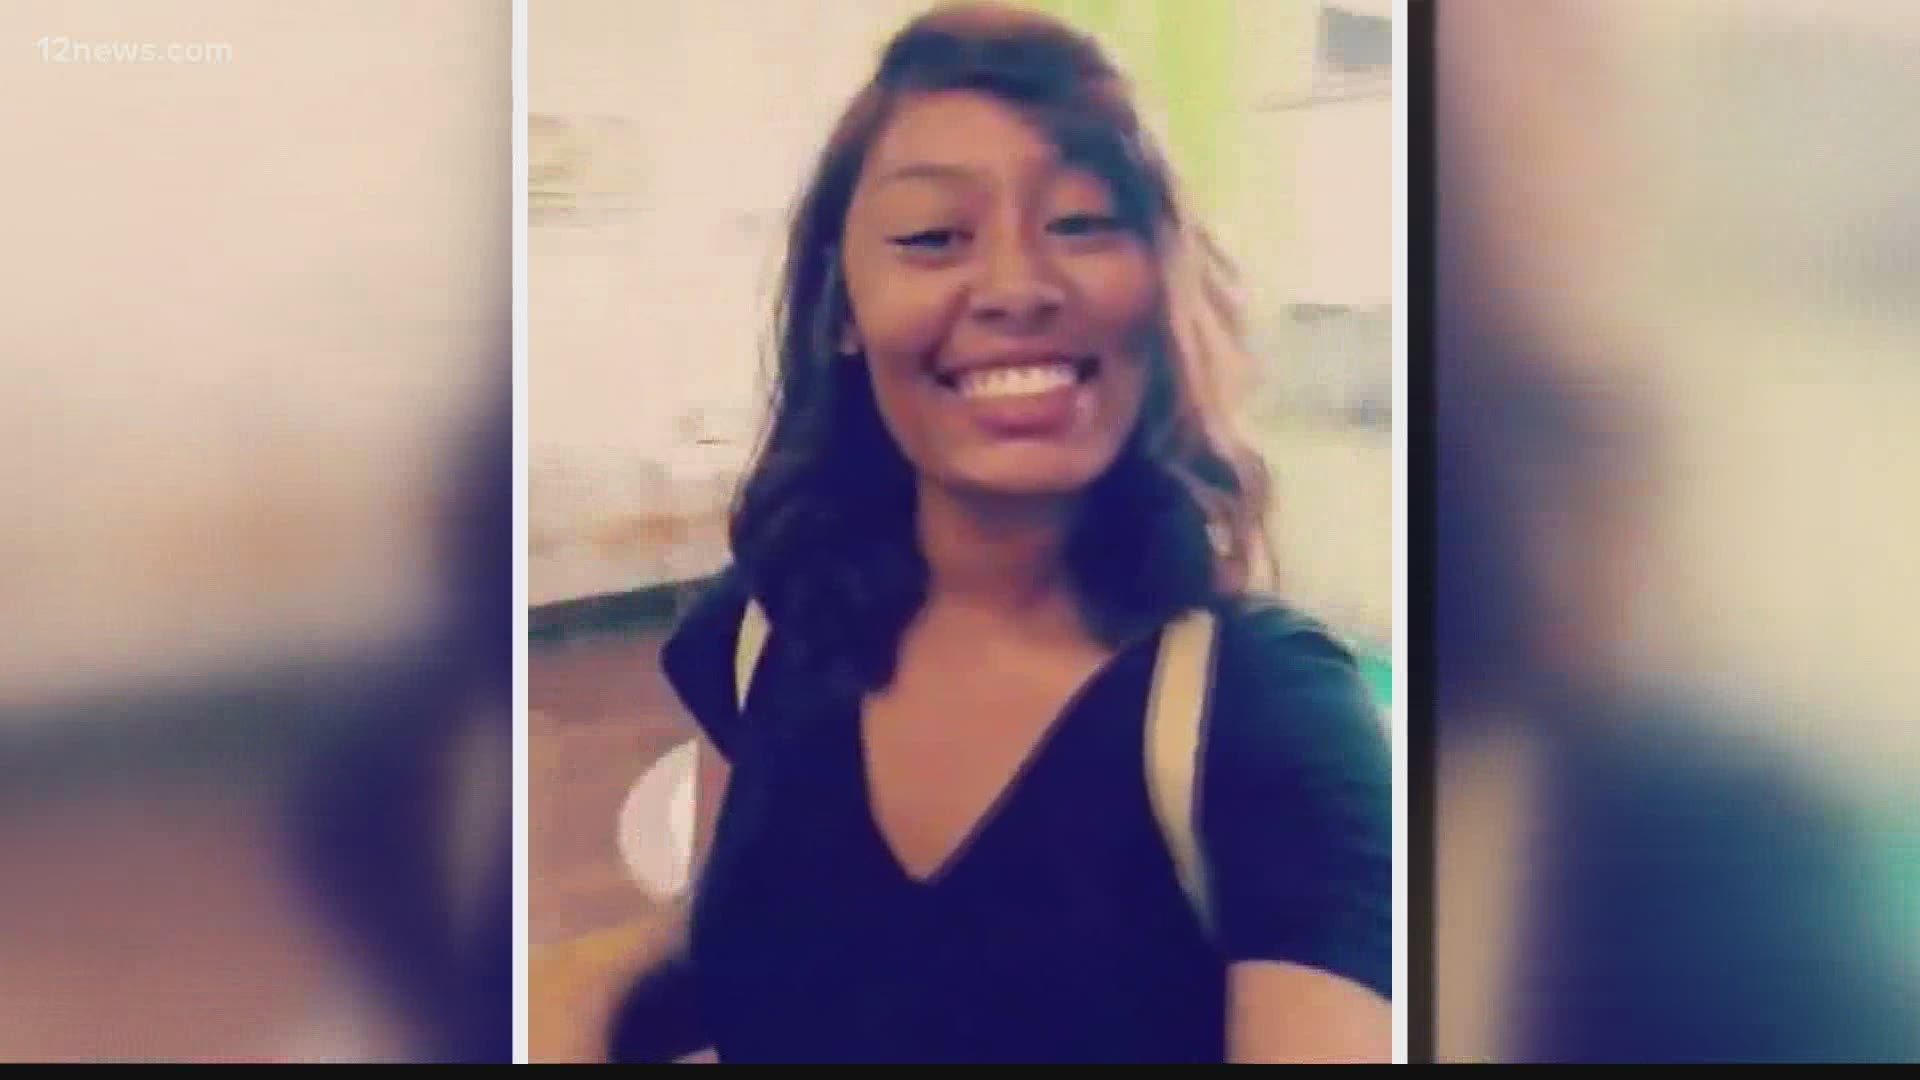 On Sunday morning, Destiny McClain was at a food truck in Phoenix when a man from a car opened fire and hit her.